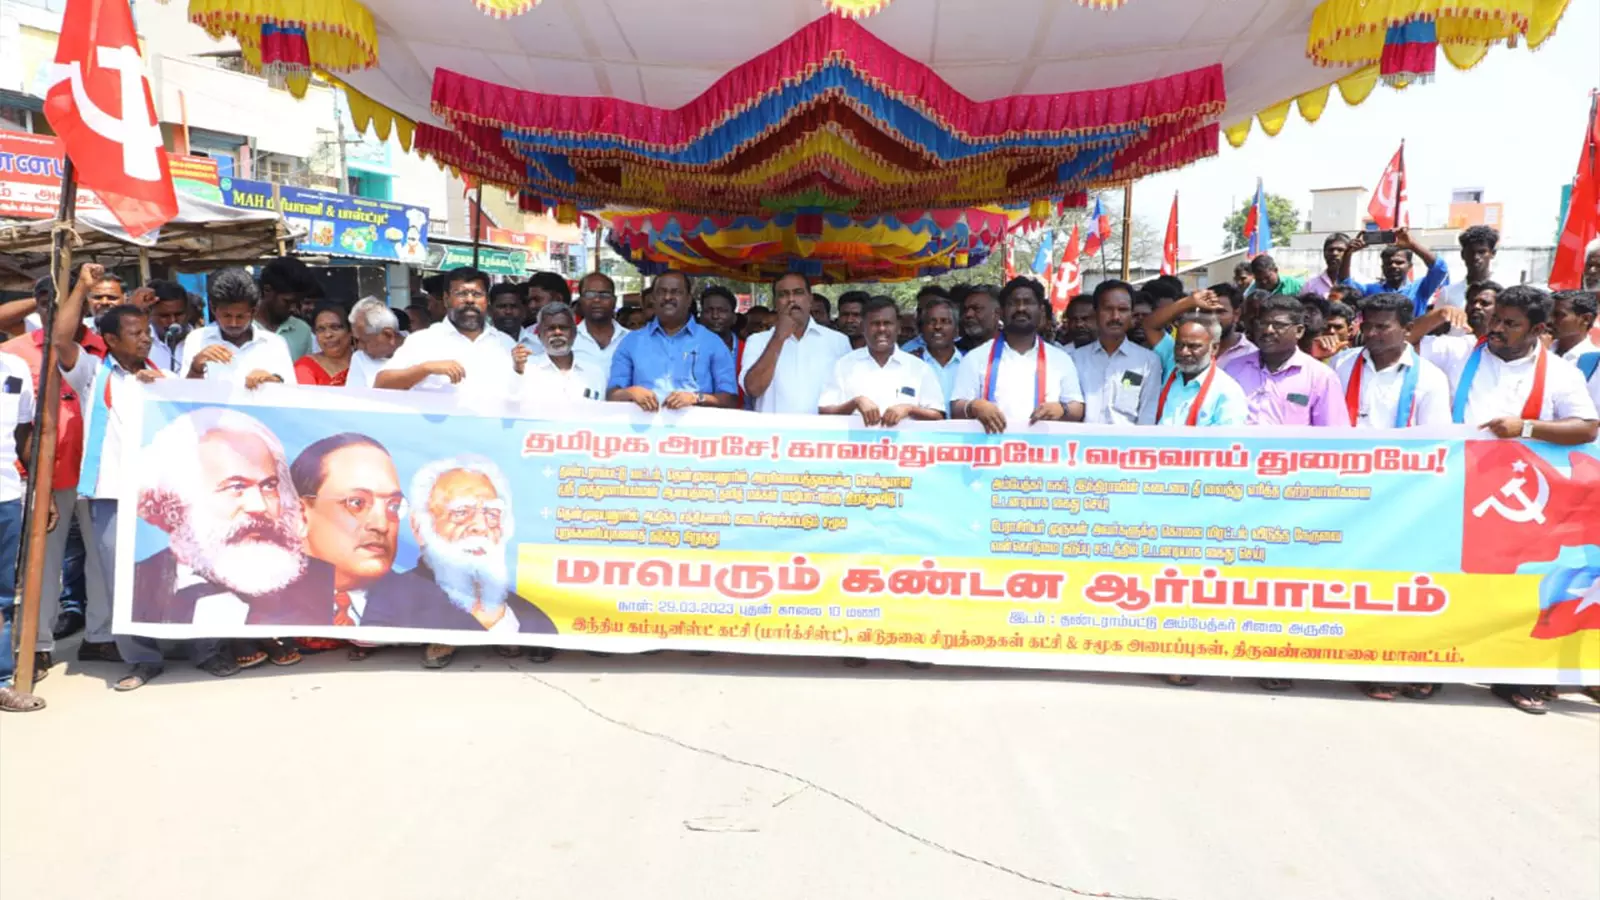 A protest demanding Dalit entry in Sri Muthu Mariamman Temple. Photo: Subramani Muthuvel